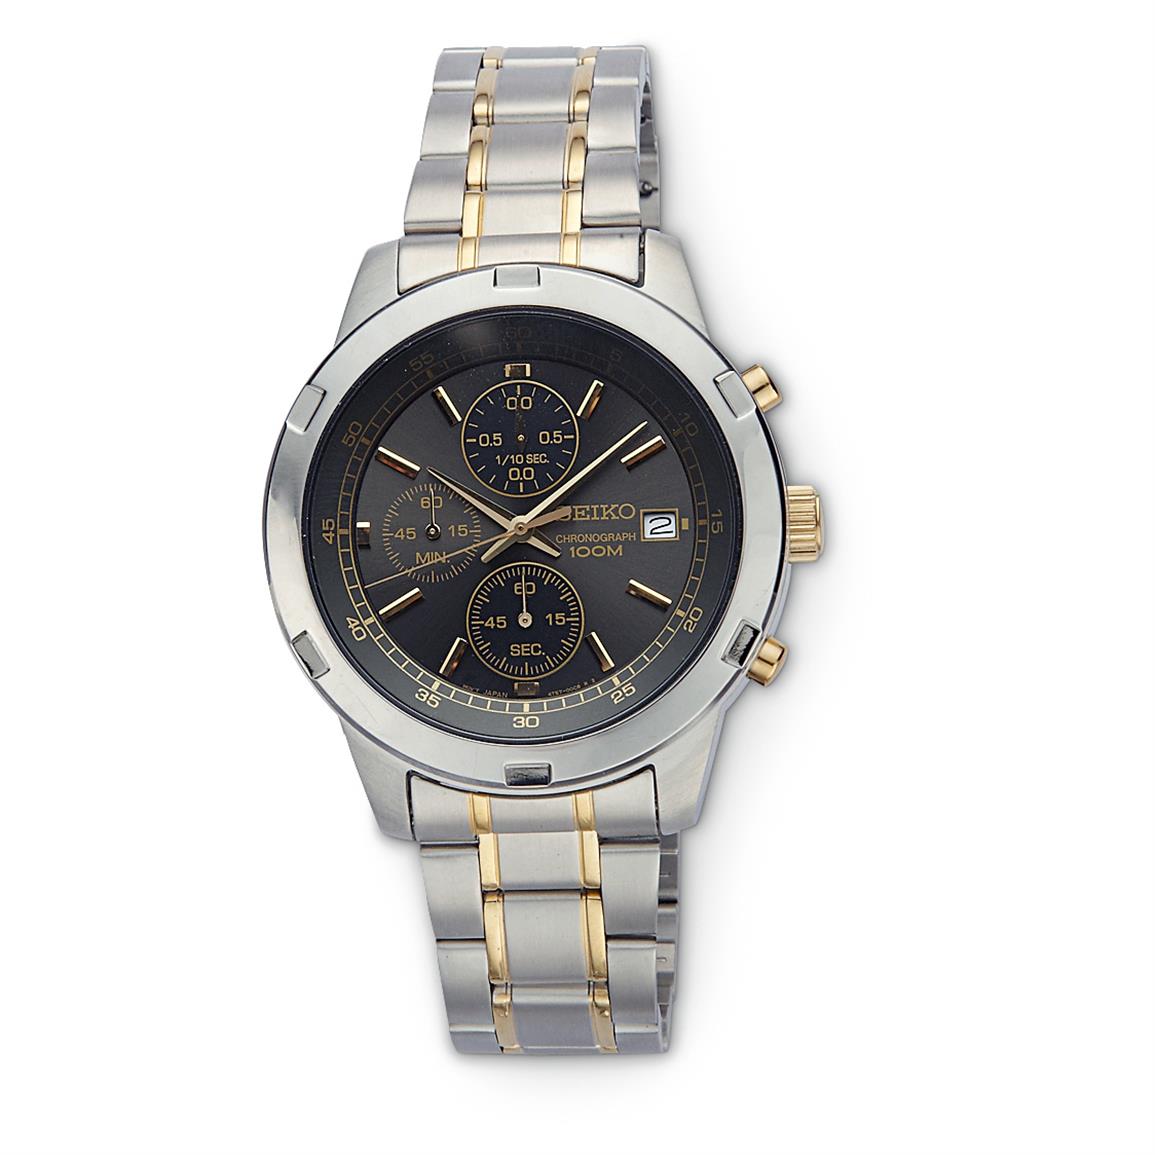 SEIKO Chronograph Watch - 619523, Watches at Sportsman's Guide